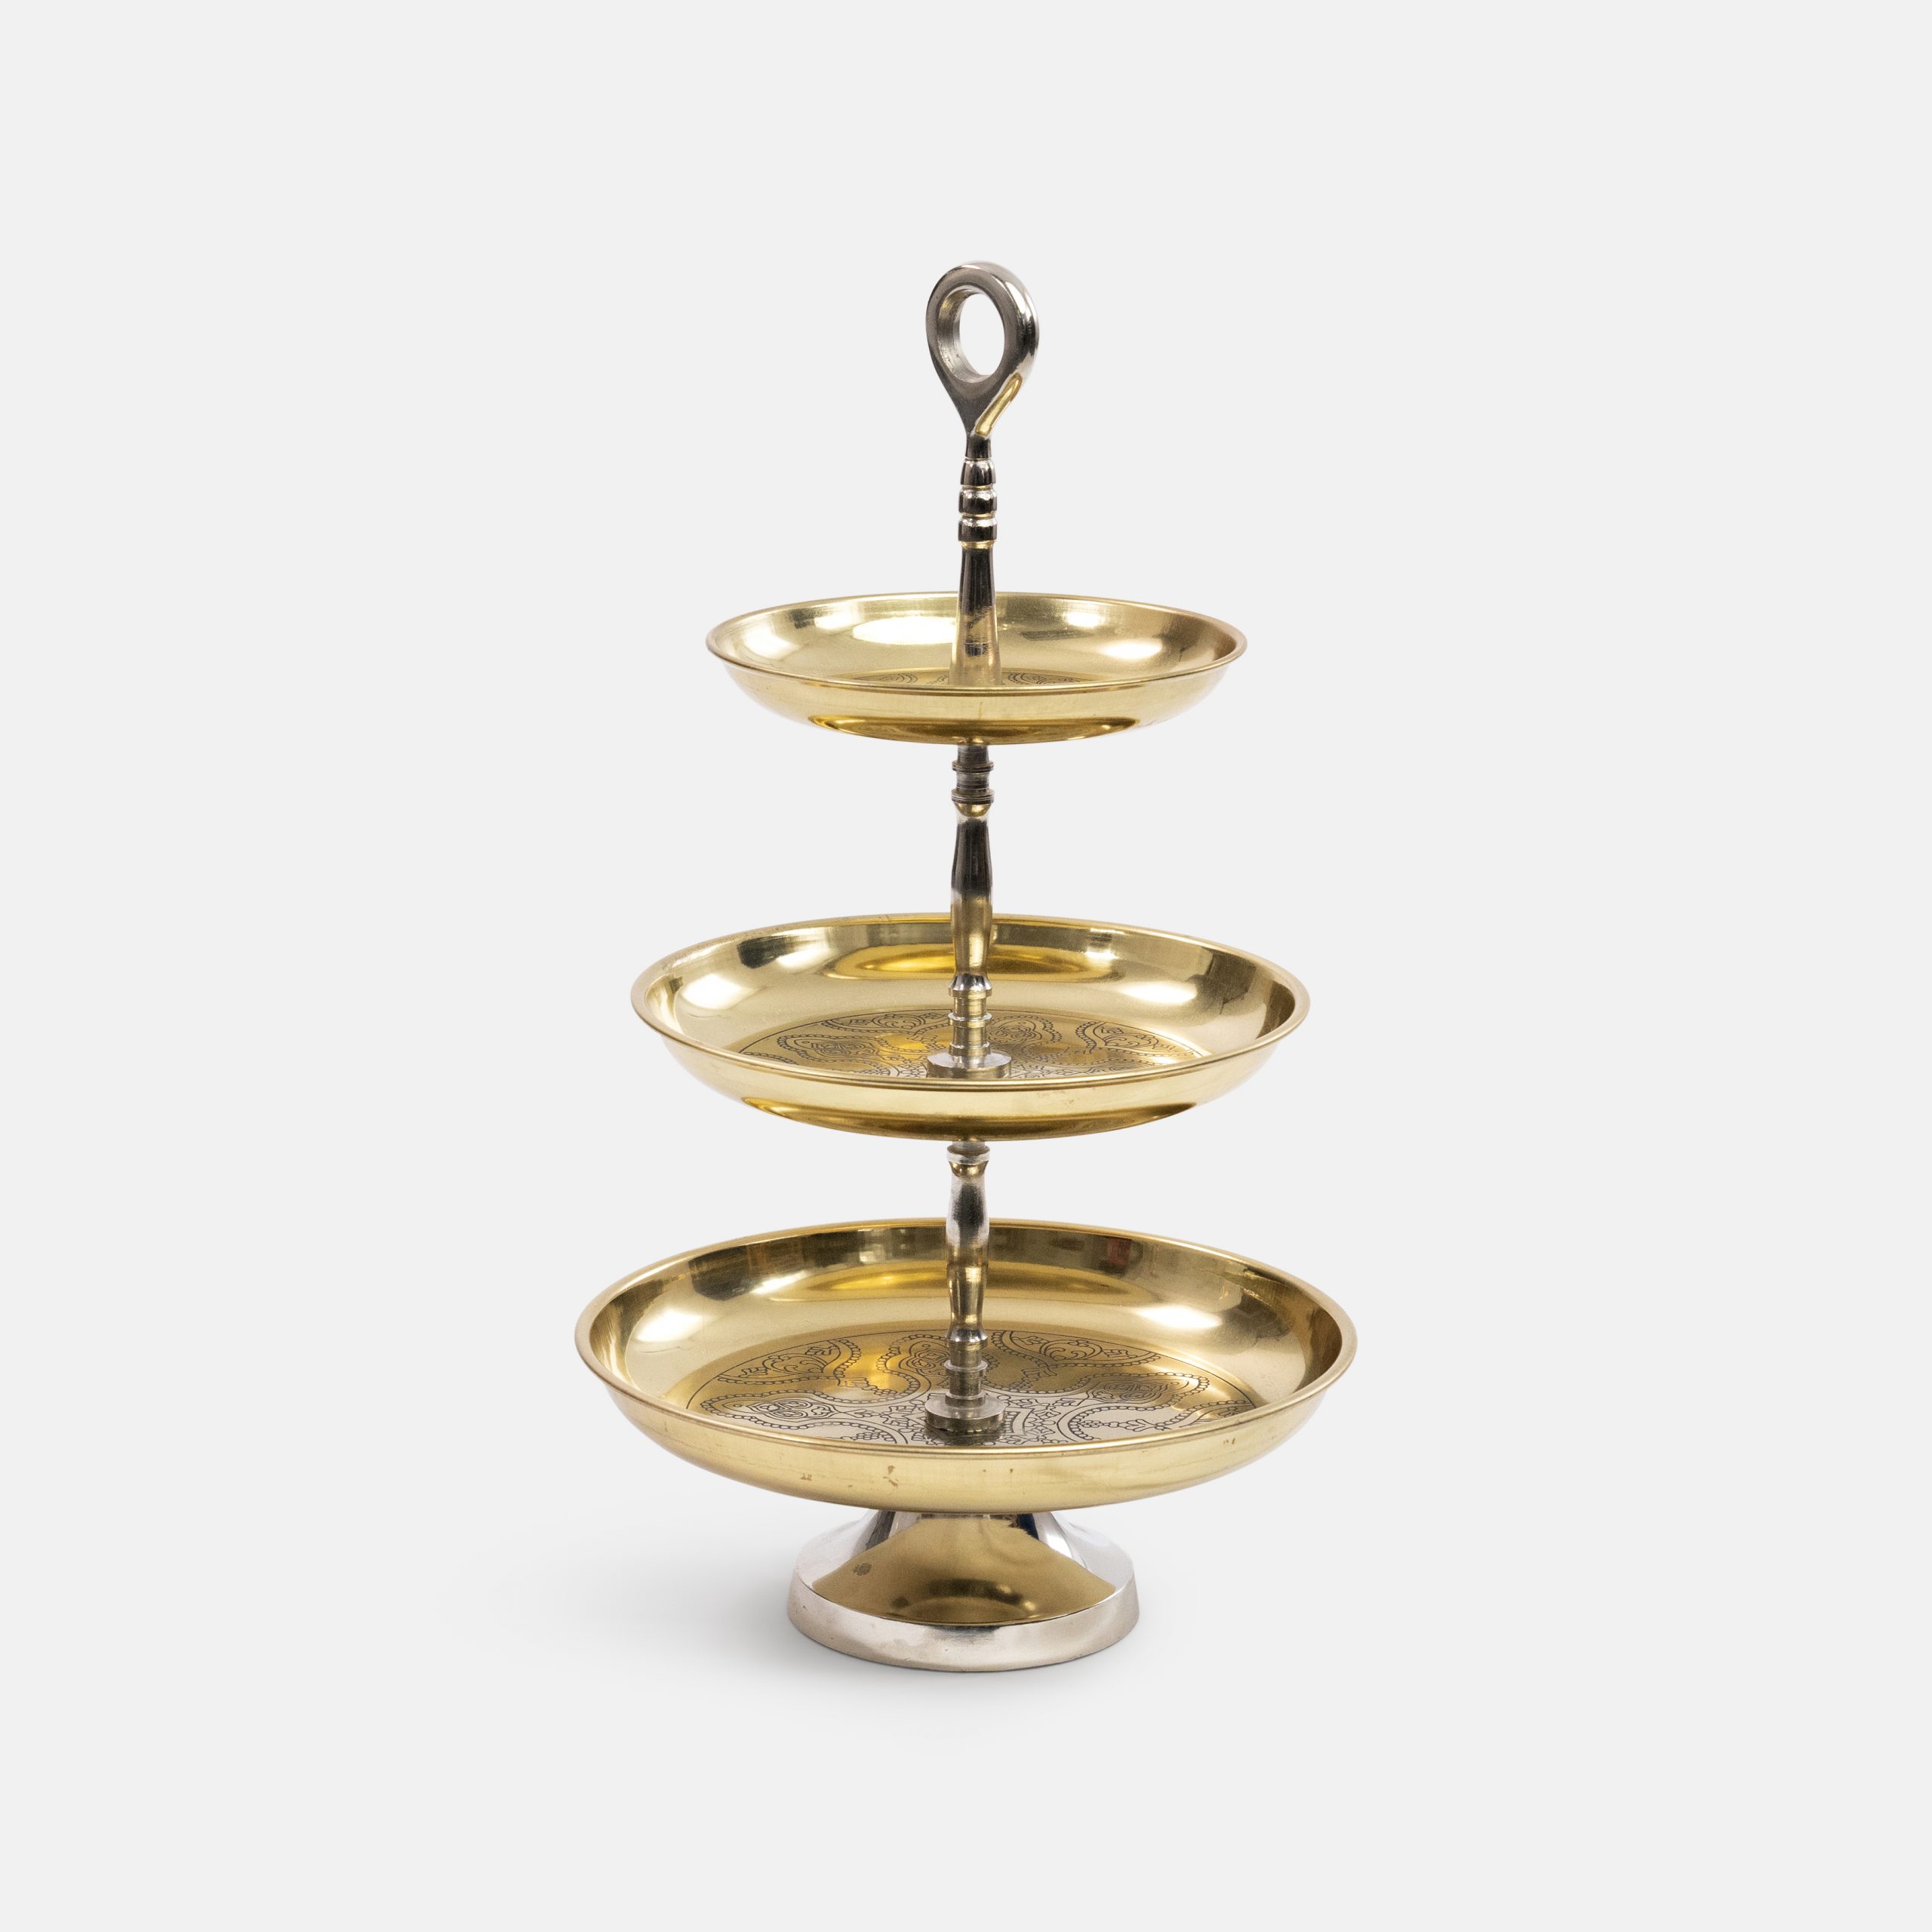 3 TIERED CAKE STAND, Gold